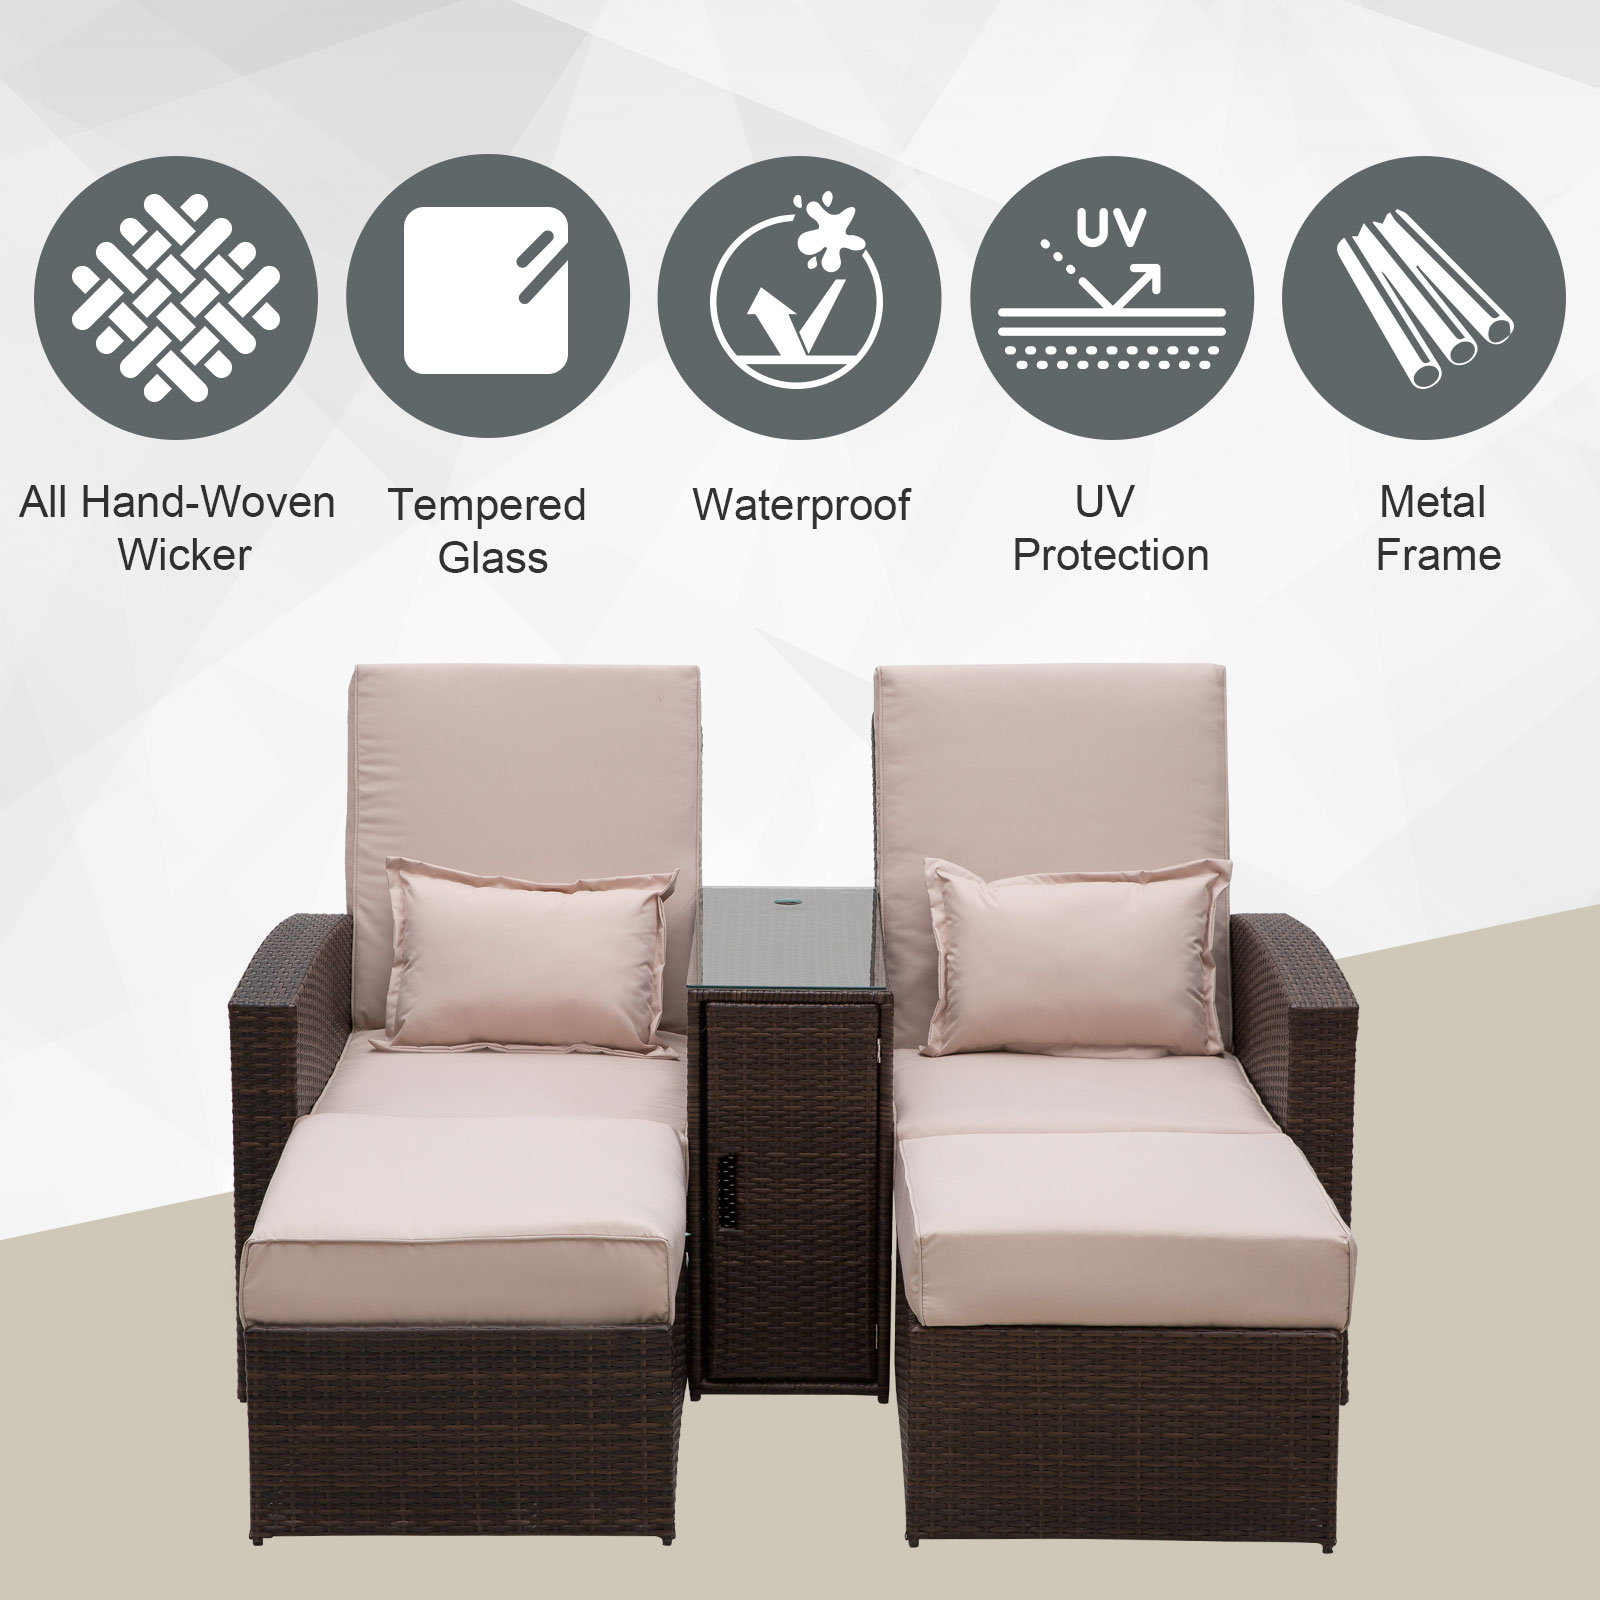 Outsunny Outdoor Adjustable Garden Rattan Companion Sofa Chair & Stool Lounger Recliner Love Sunbed Daybed Patio Wicker Weave Furniture Set Already Assembled with Umbrella Hole Brown